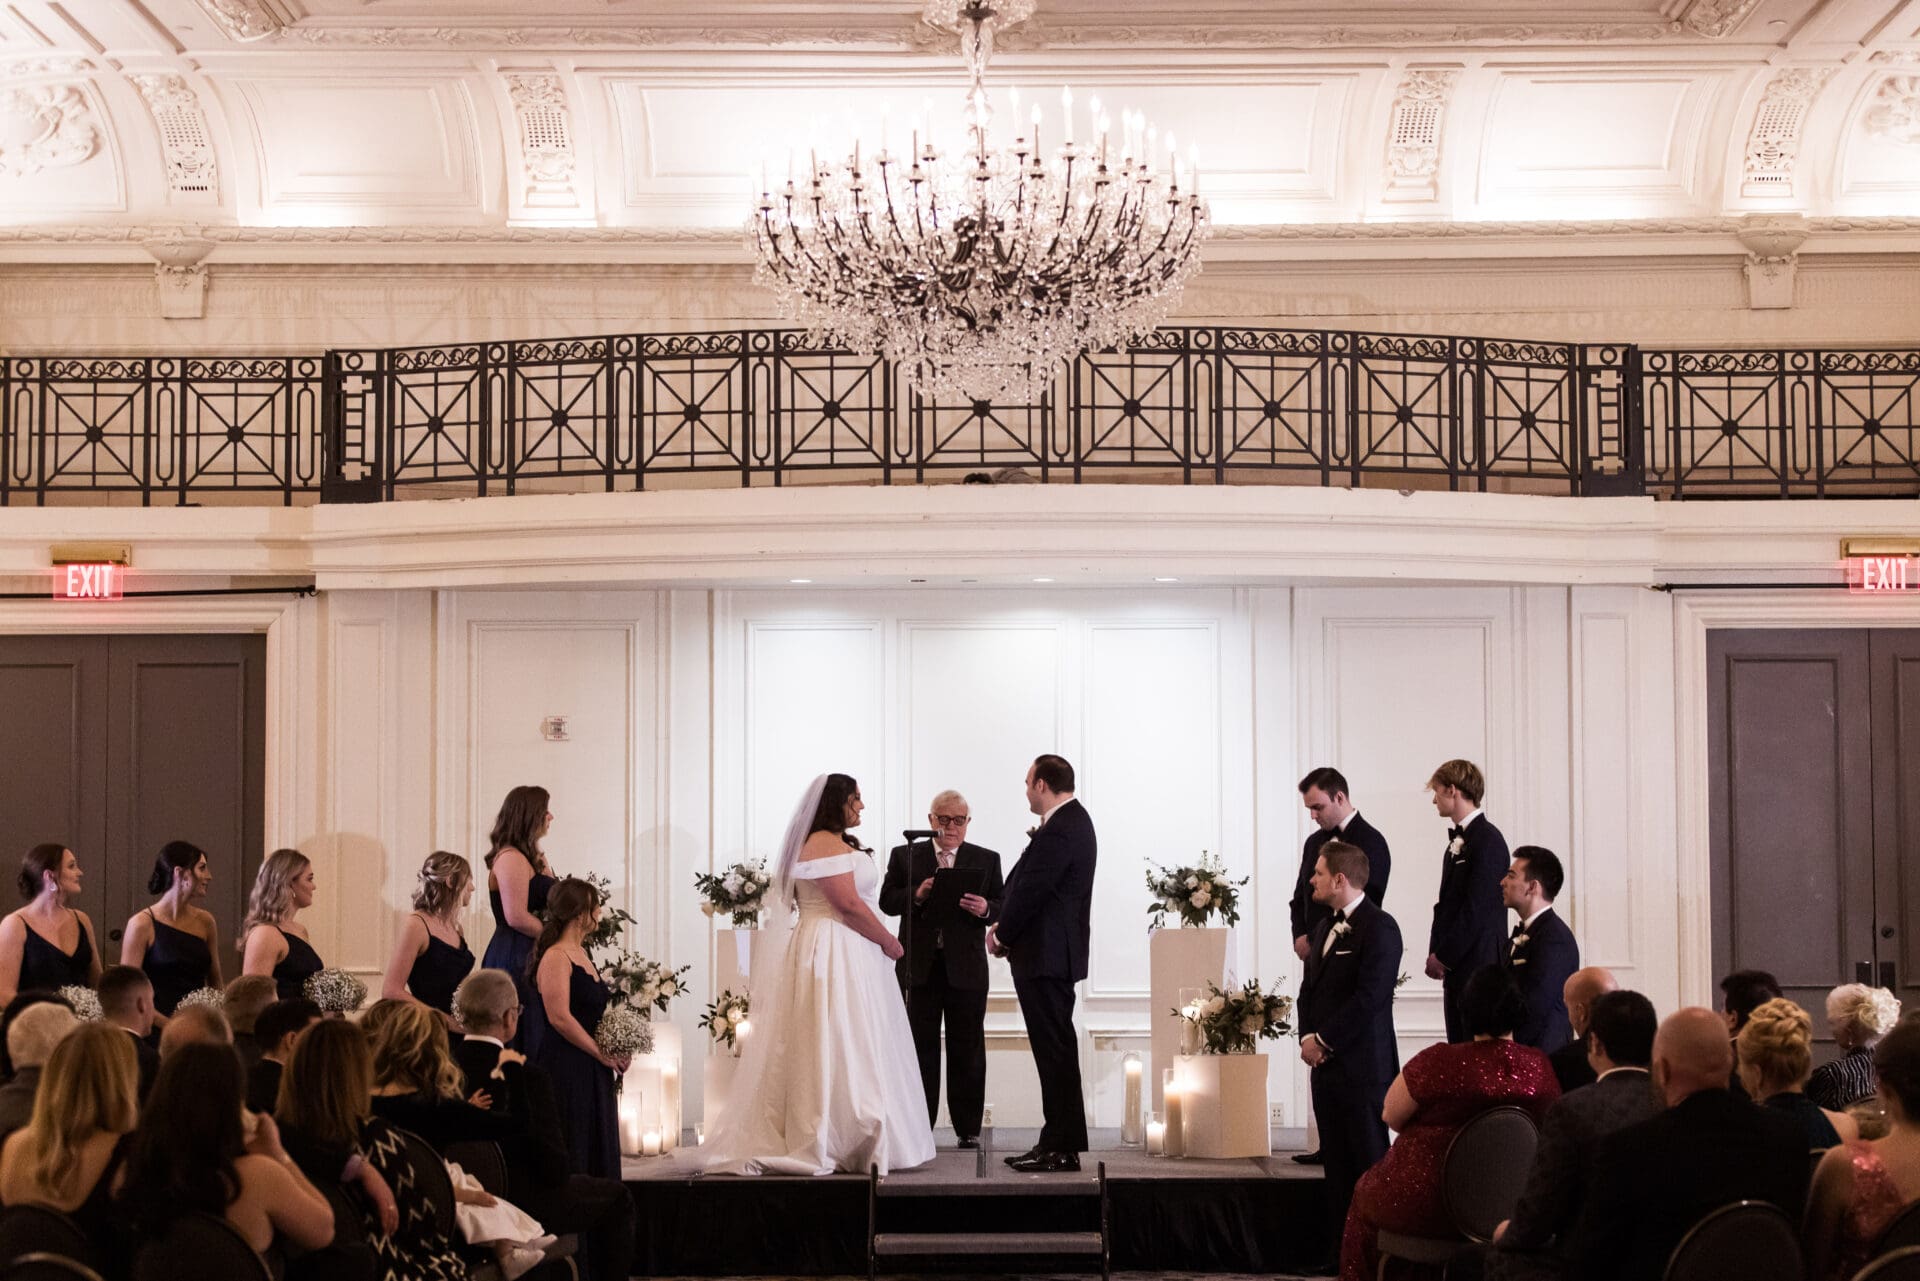 A bride and groom are standing on a stage during their wedding ceremony while the officiant talks to them and their guests